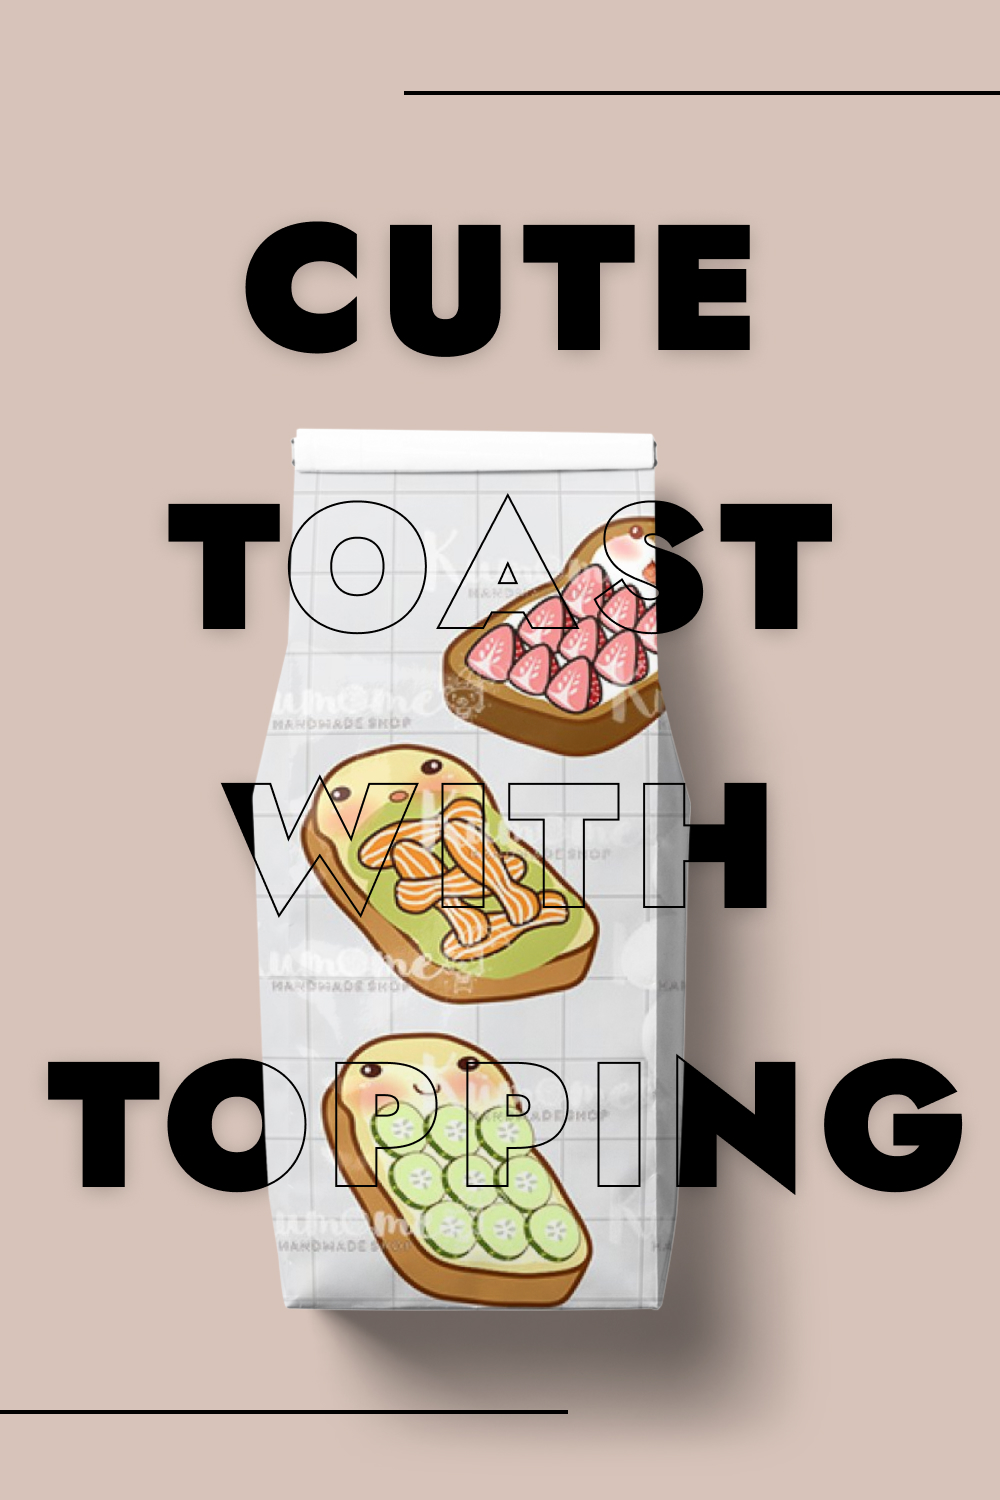 Сute toast with topping of pinterest.